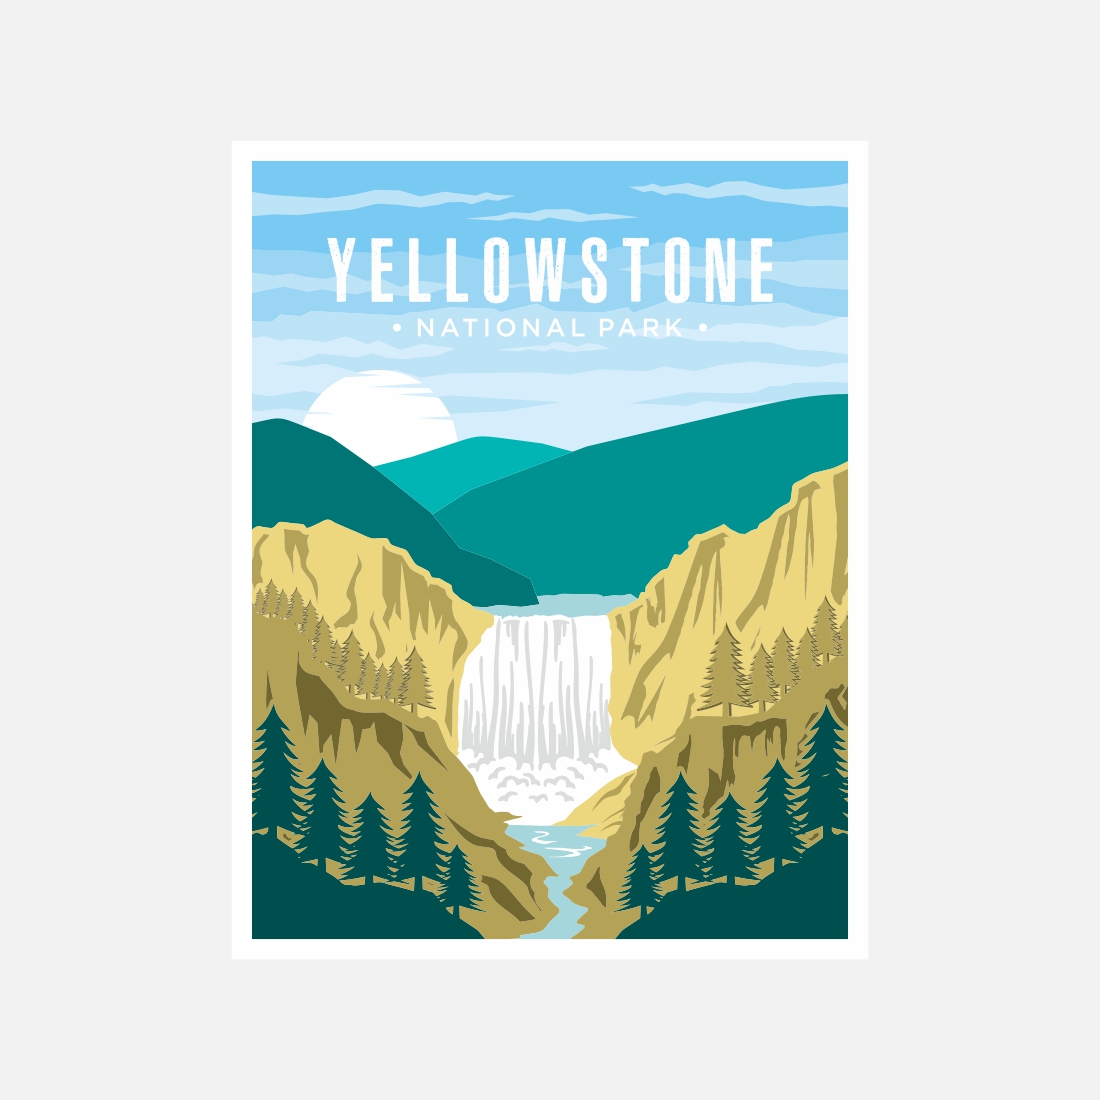 Yellowstone Falls National Park poster vector illustration design – Only $8 cover image.